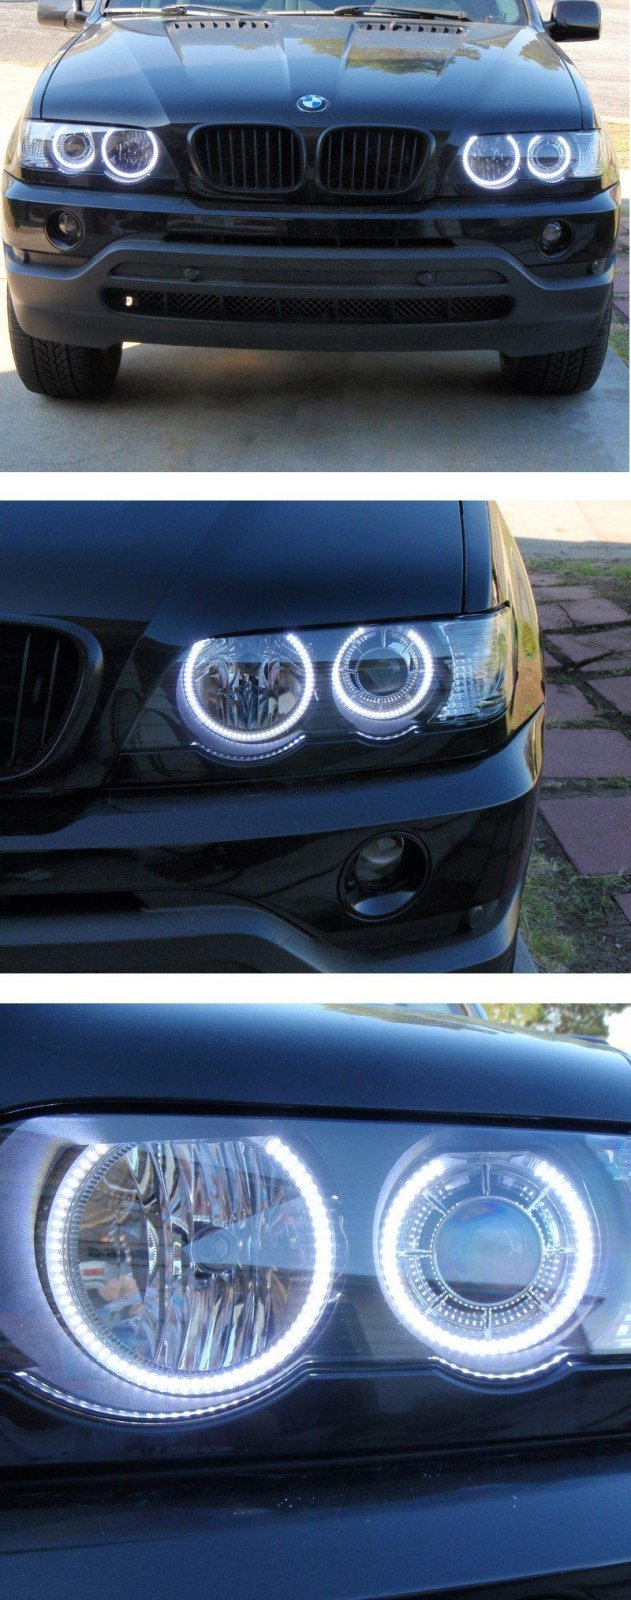 Unique Style Racing UHP (Ultra High Power) LED Angel Eye Halo Rings For DEPO Brand of 2006-2012 BMW E90 / 2000-2003 BMW E53 X5 Headlight